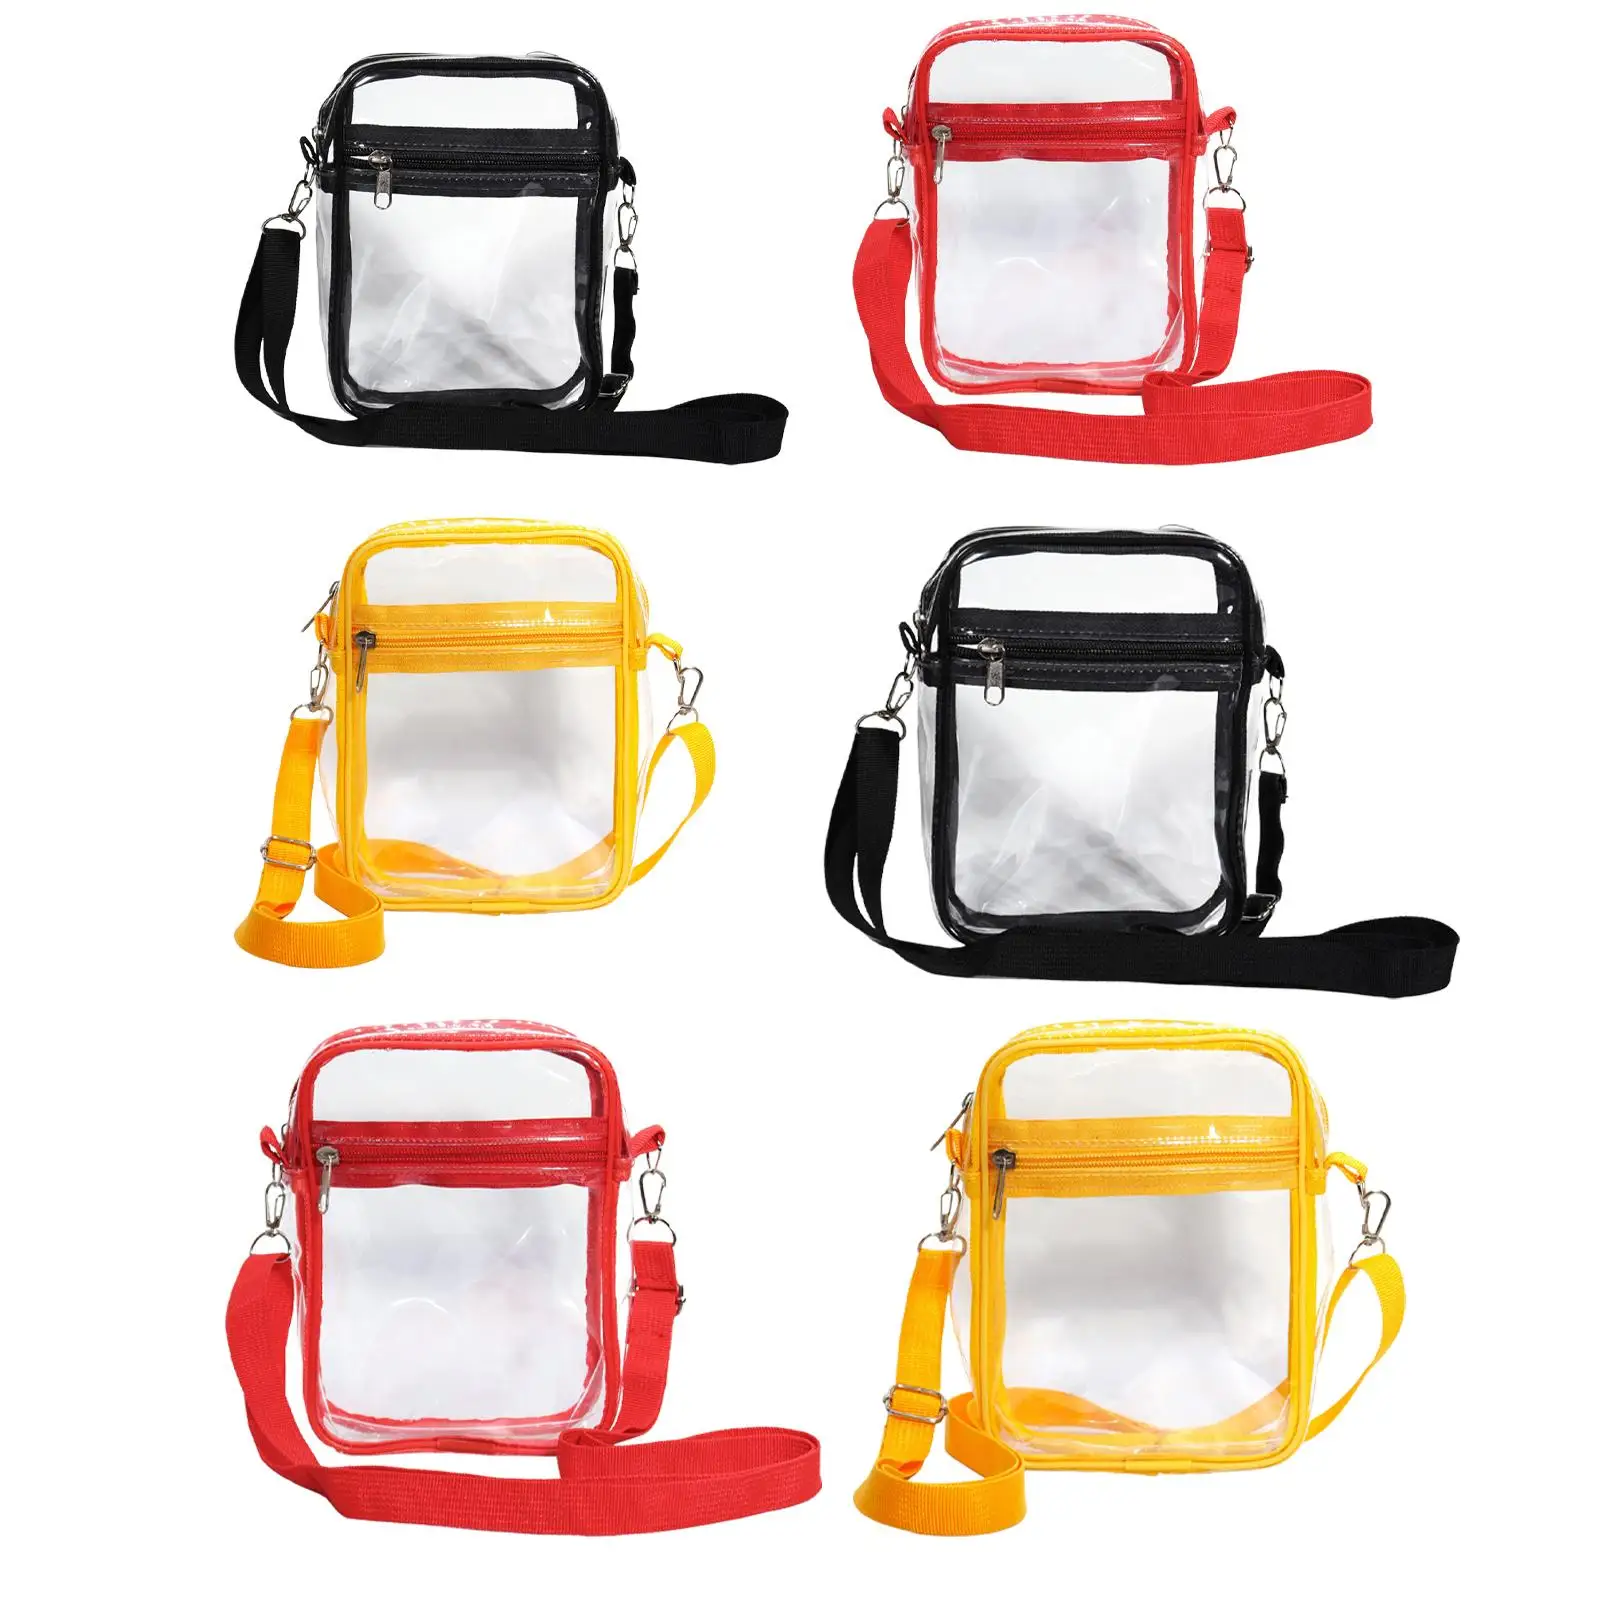 Clear Bag PVC Waterproof Transparent Bag for Travel Airport Security Check Outdoor Sporting Events Sports